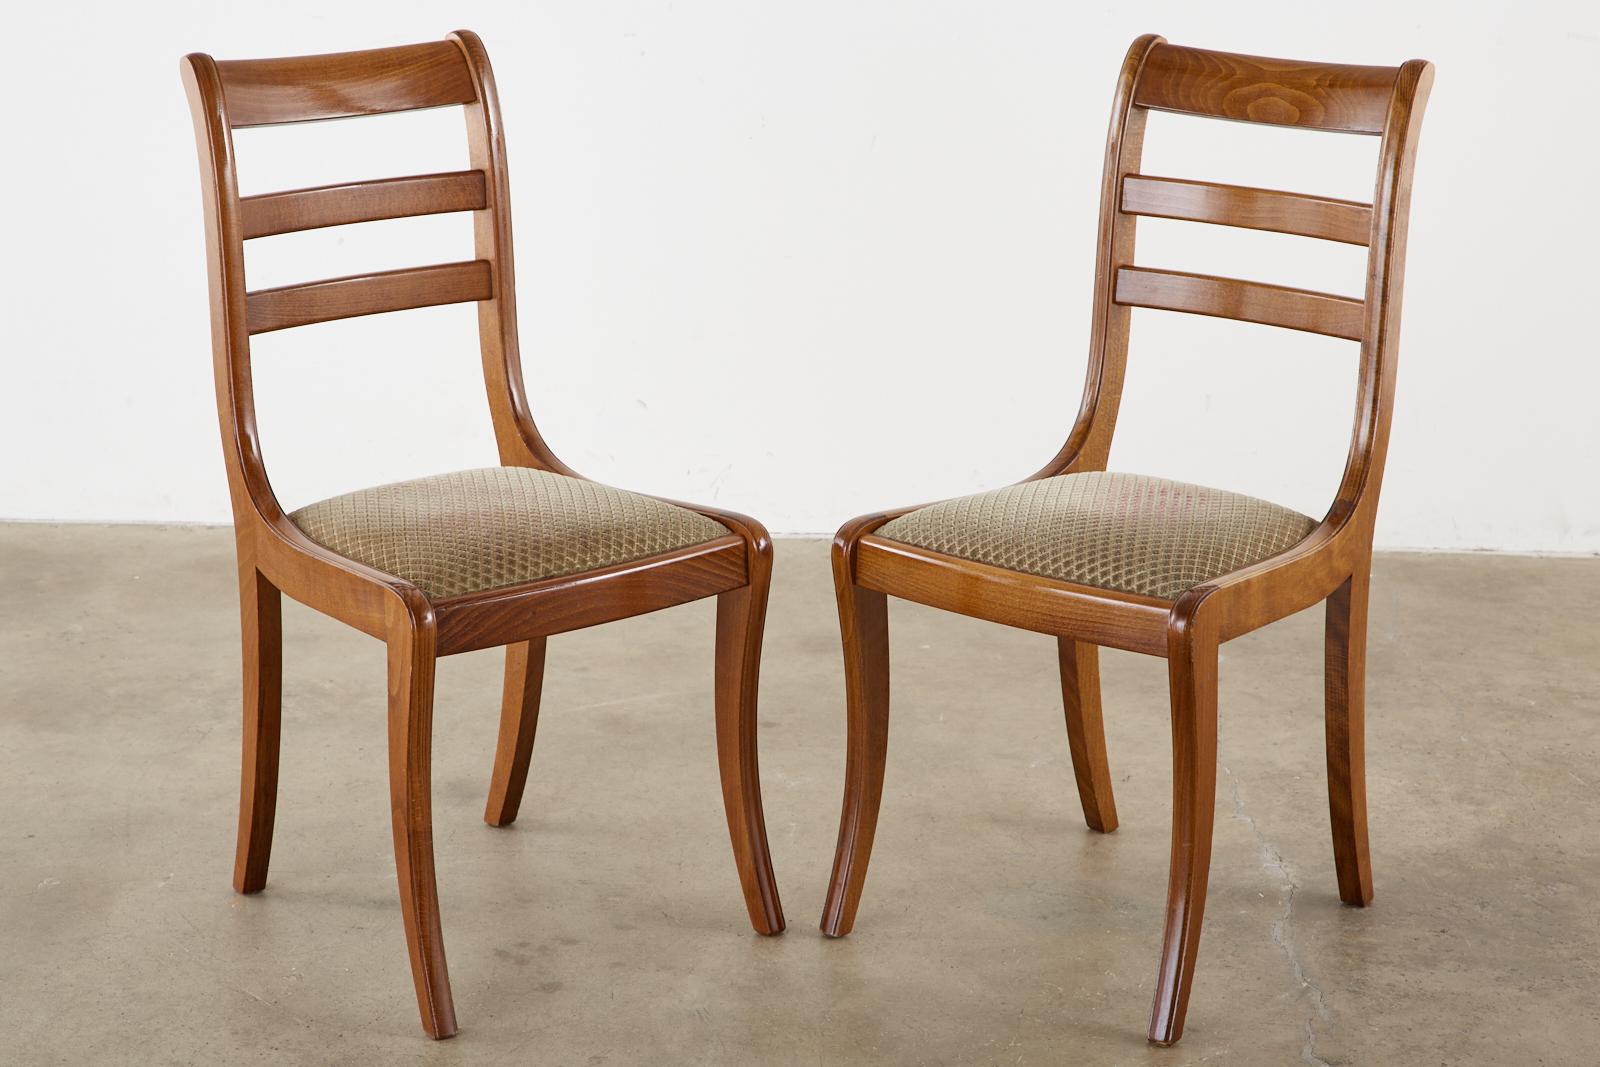 20th Century Set of Six English Regency Style Dining Chairs